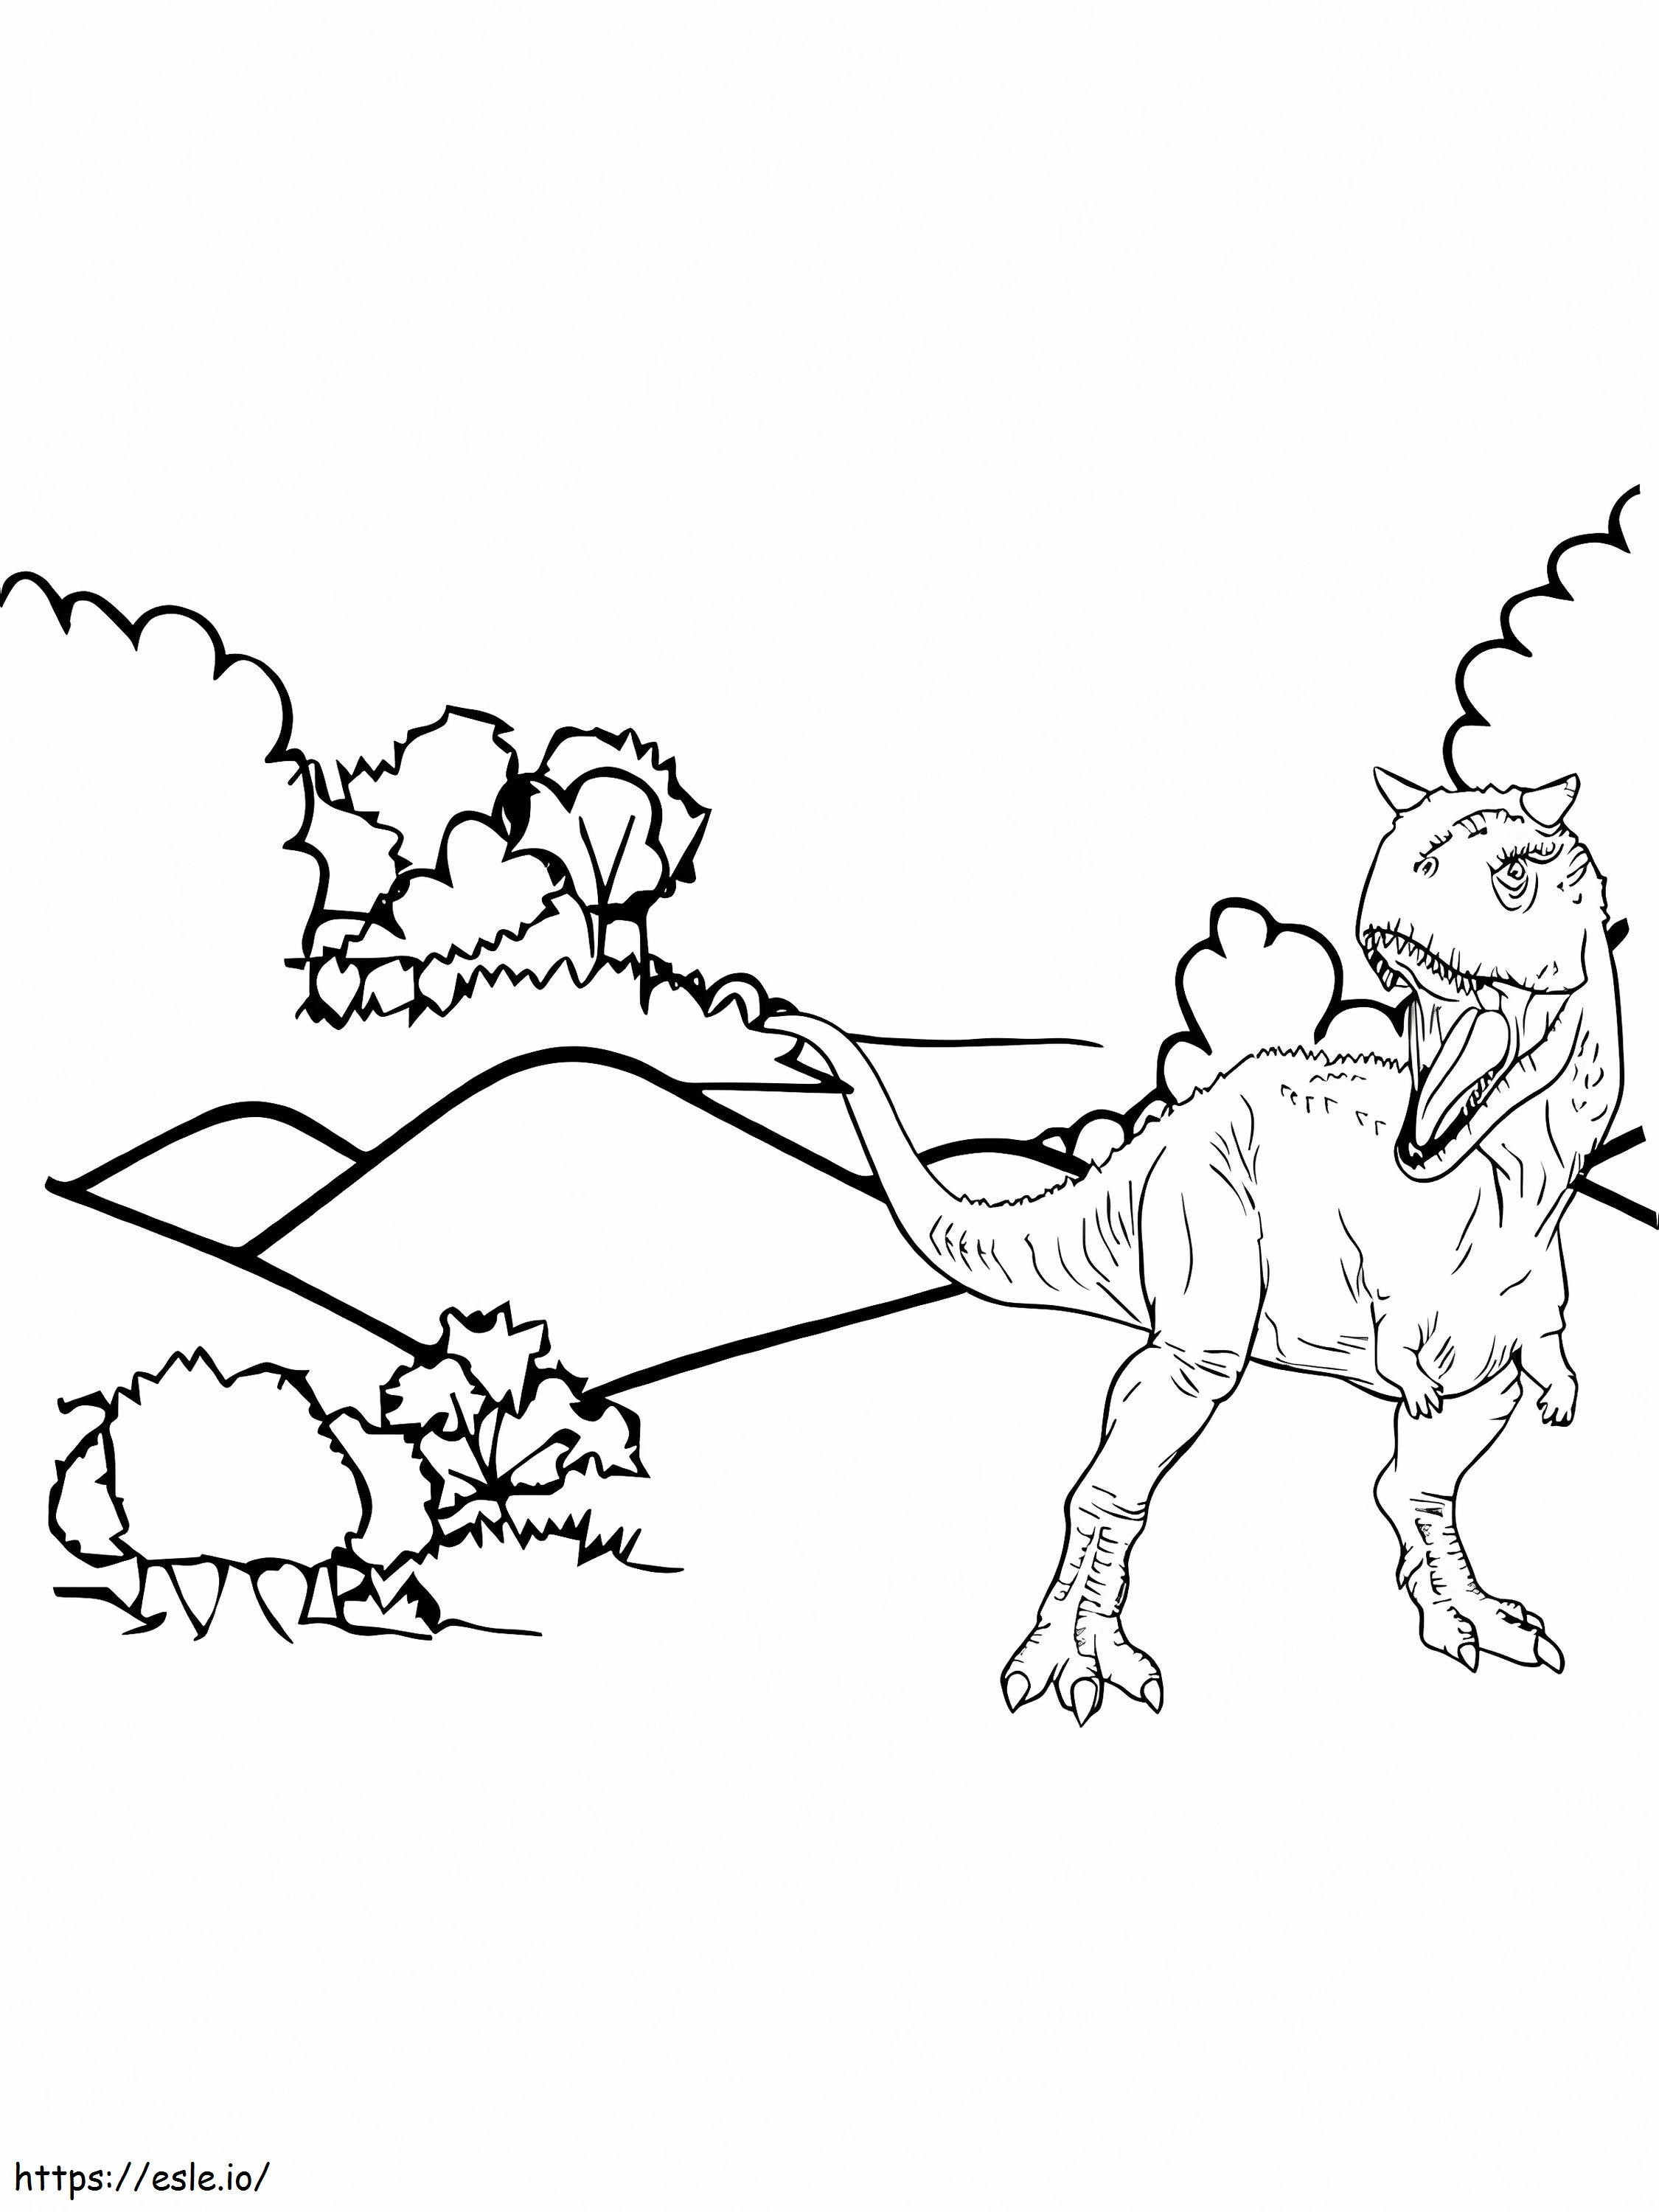 Carnotaurus And Nature coloring page